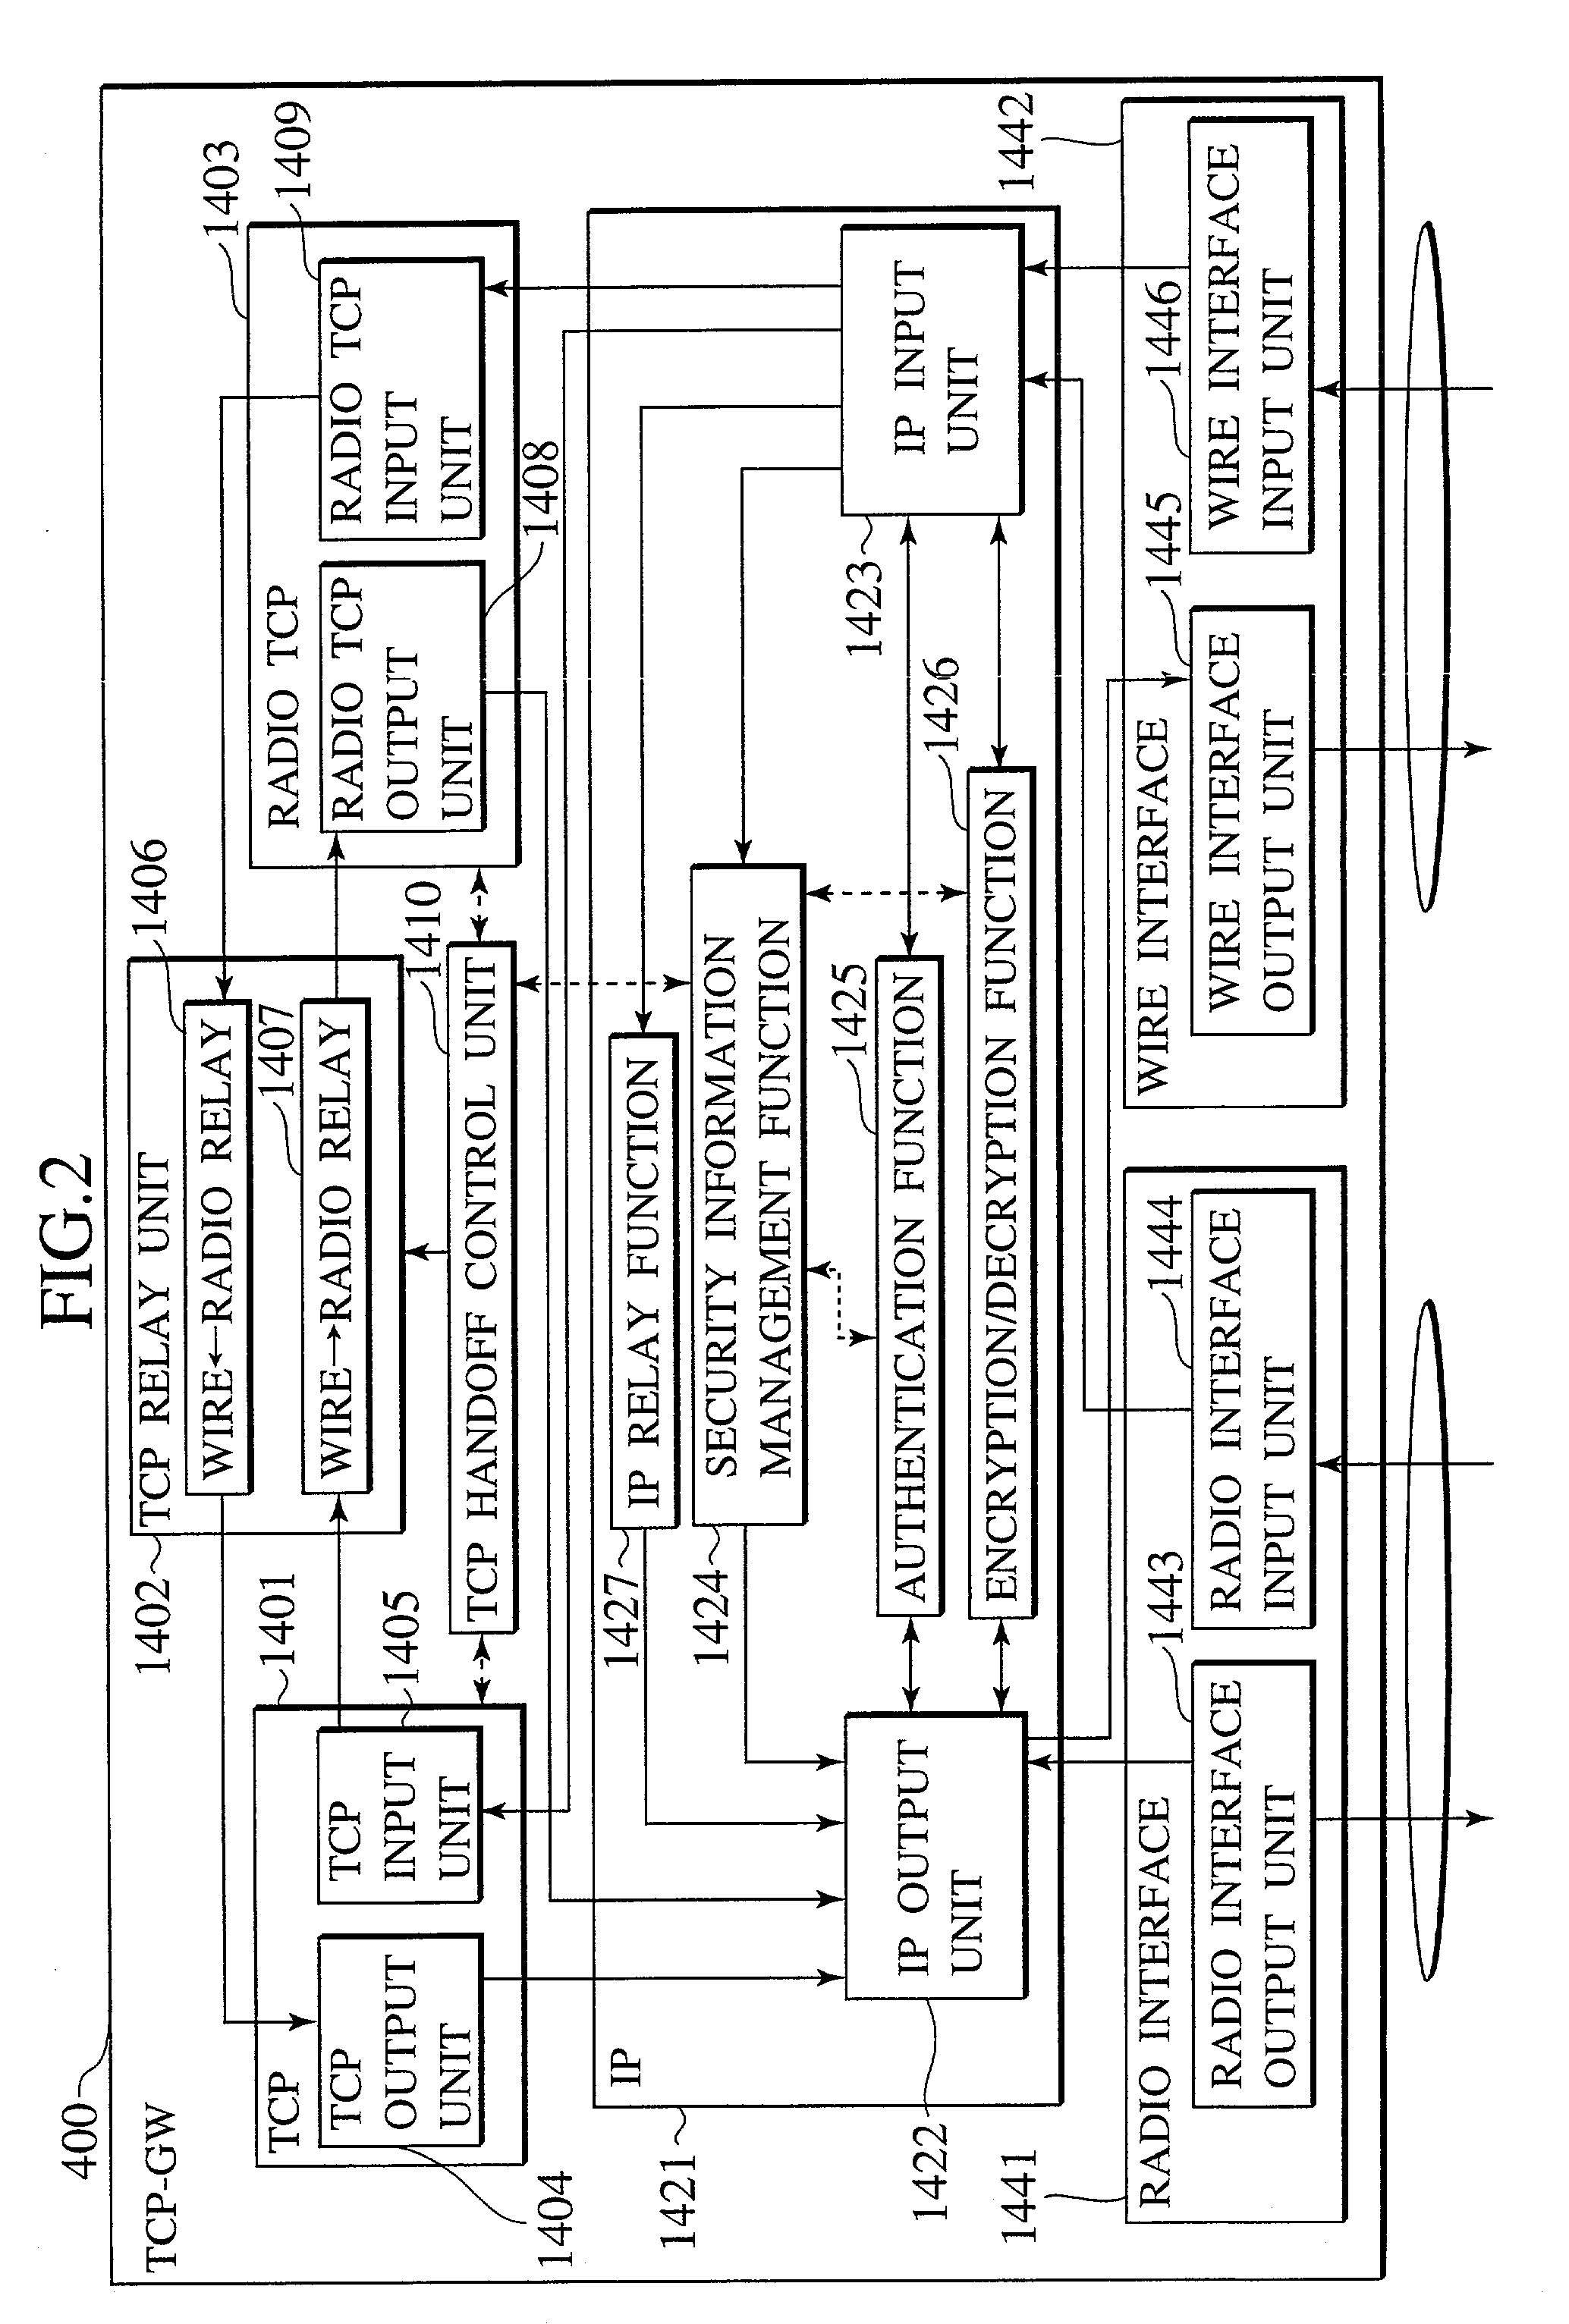 Communication control scheme using proxy device and security protocol in combination